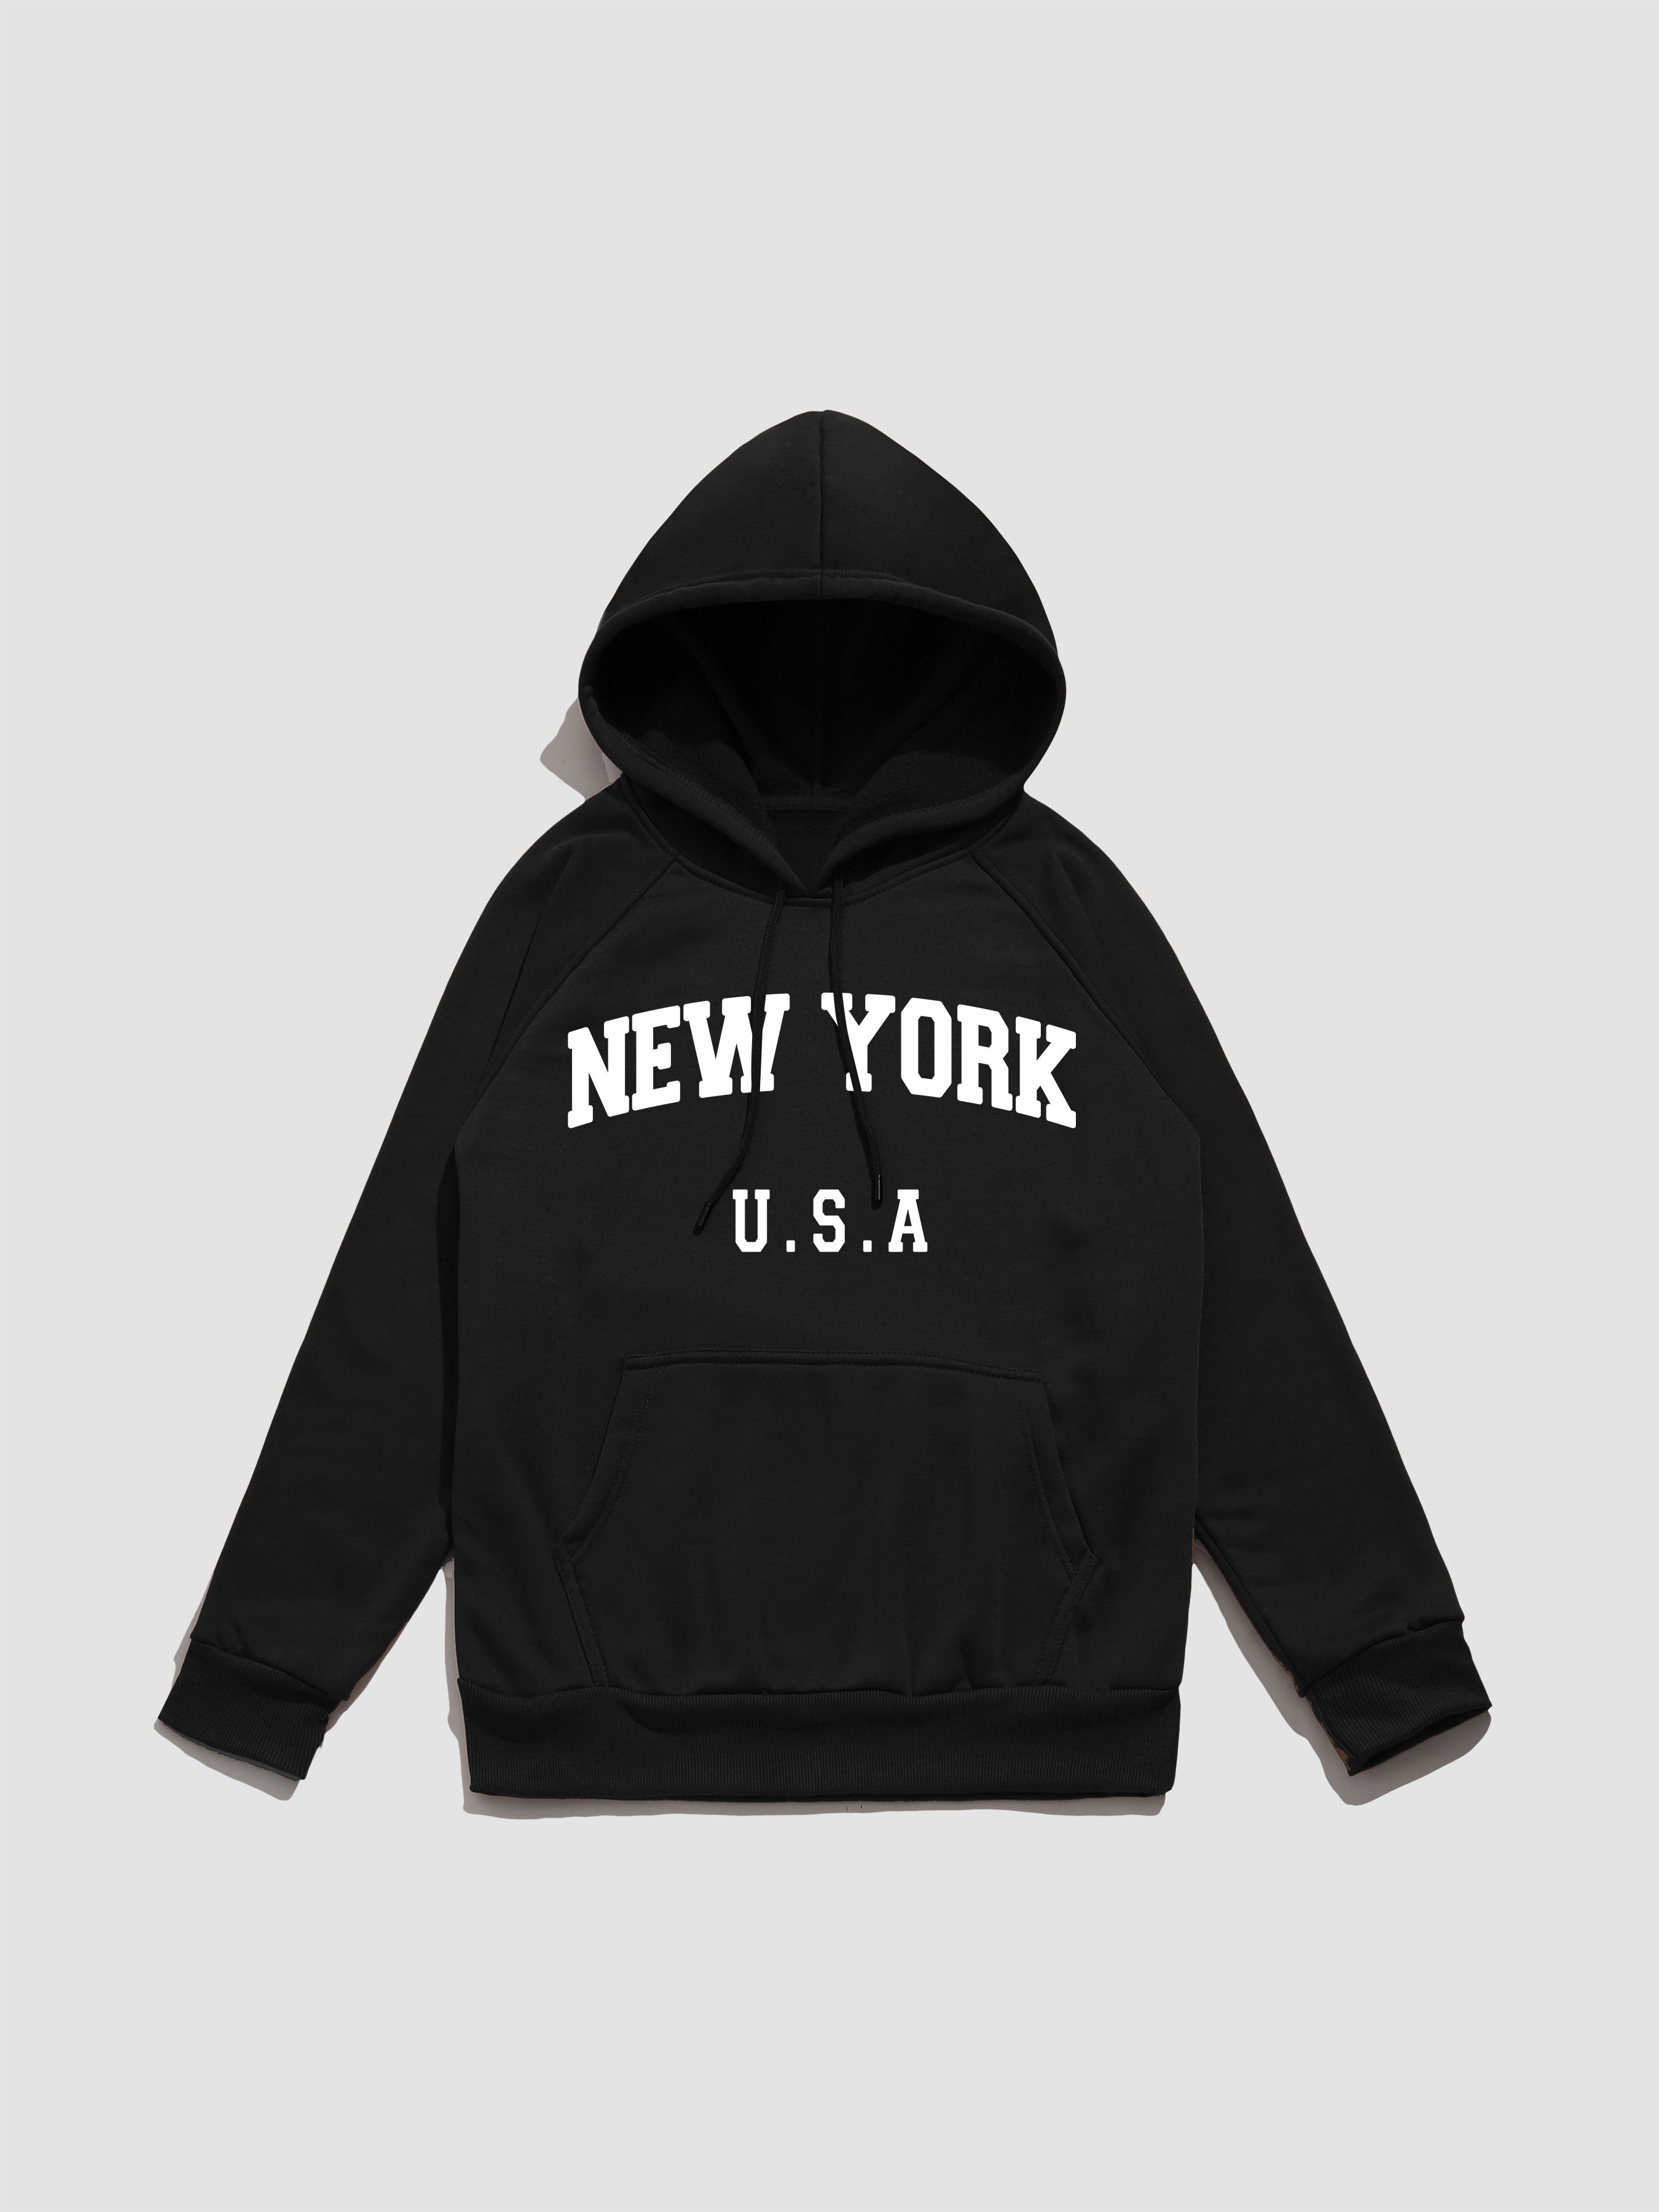 New York Letter Graphic Hoodies